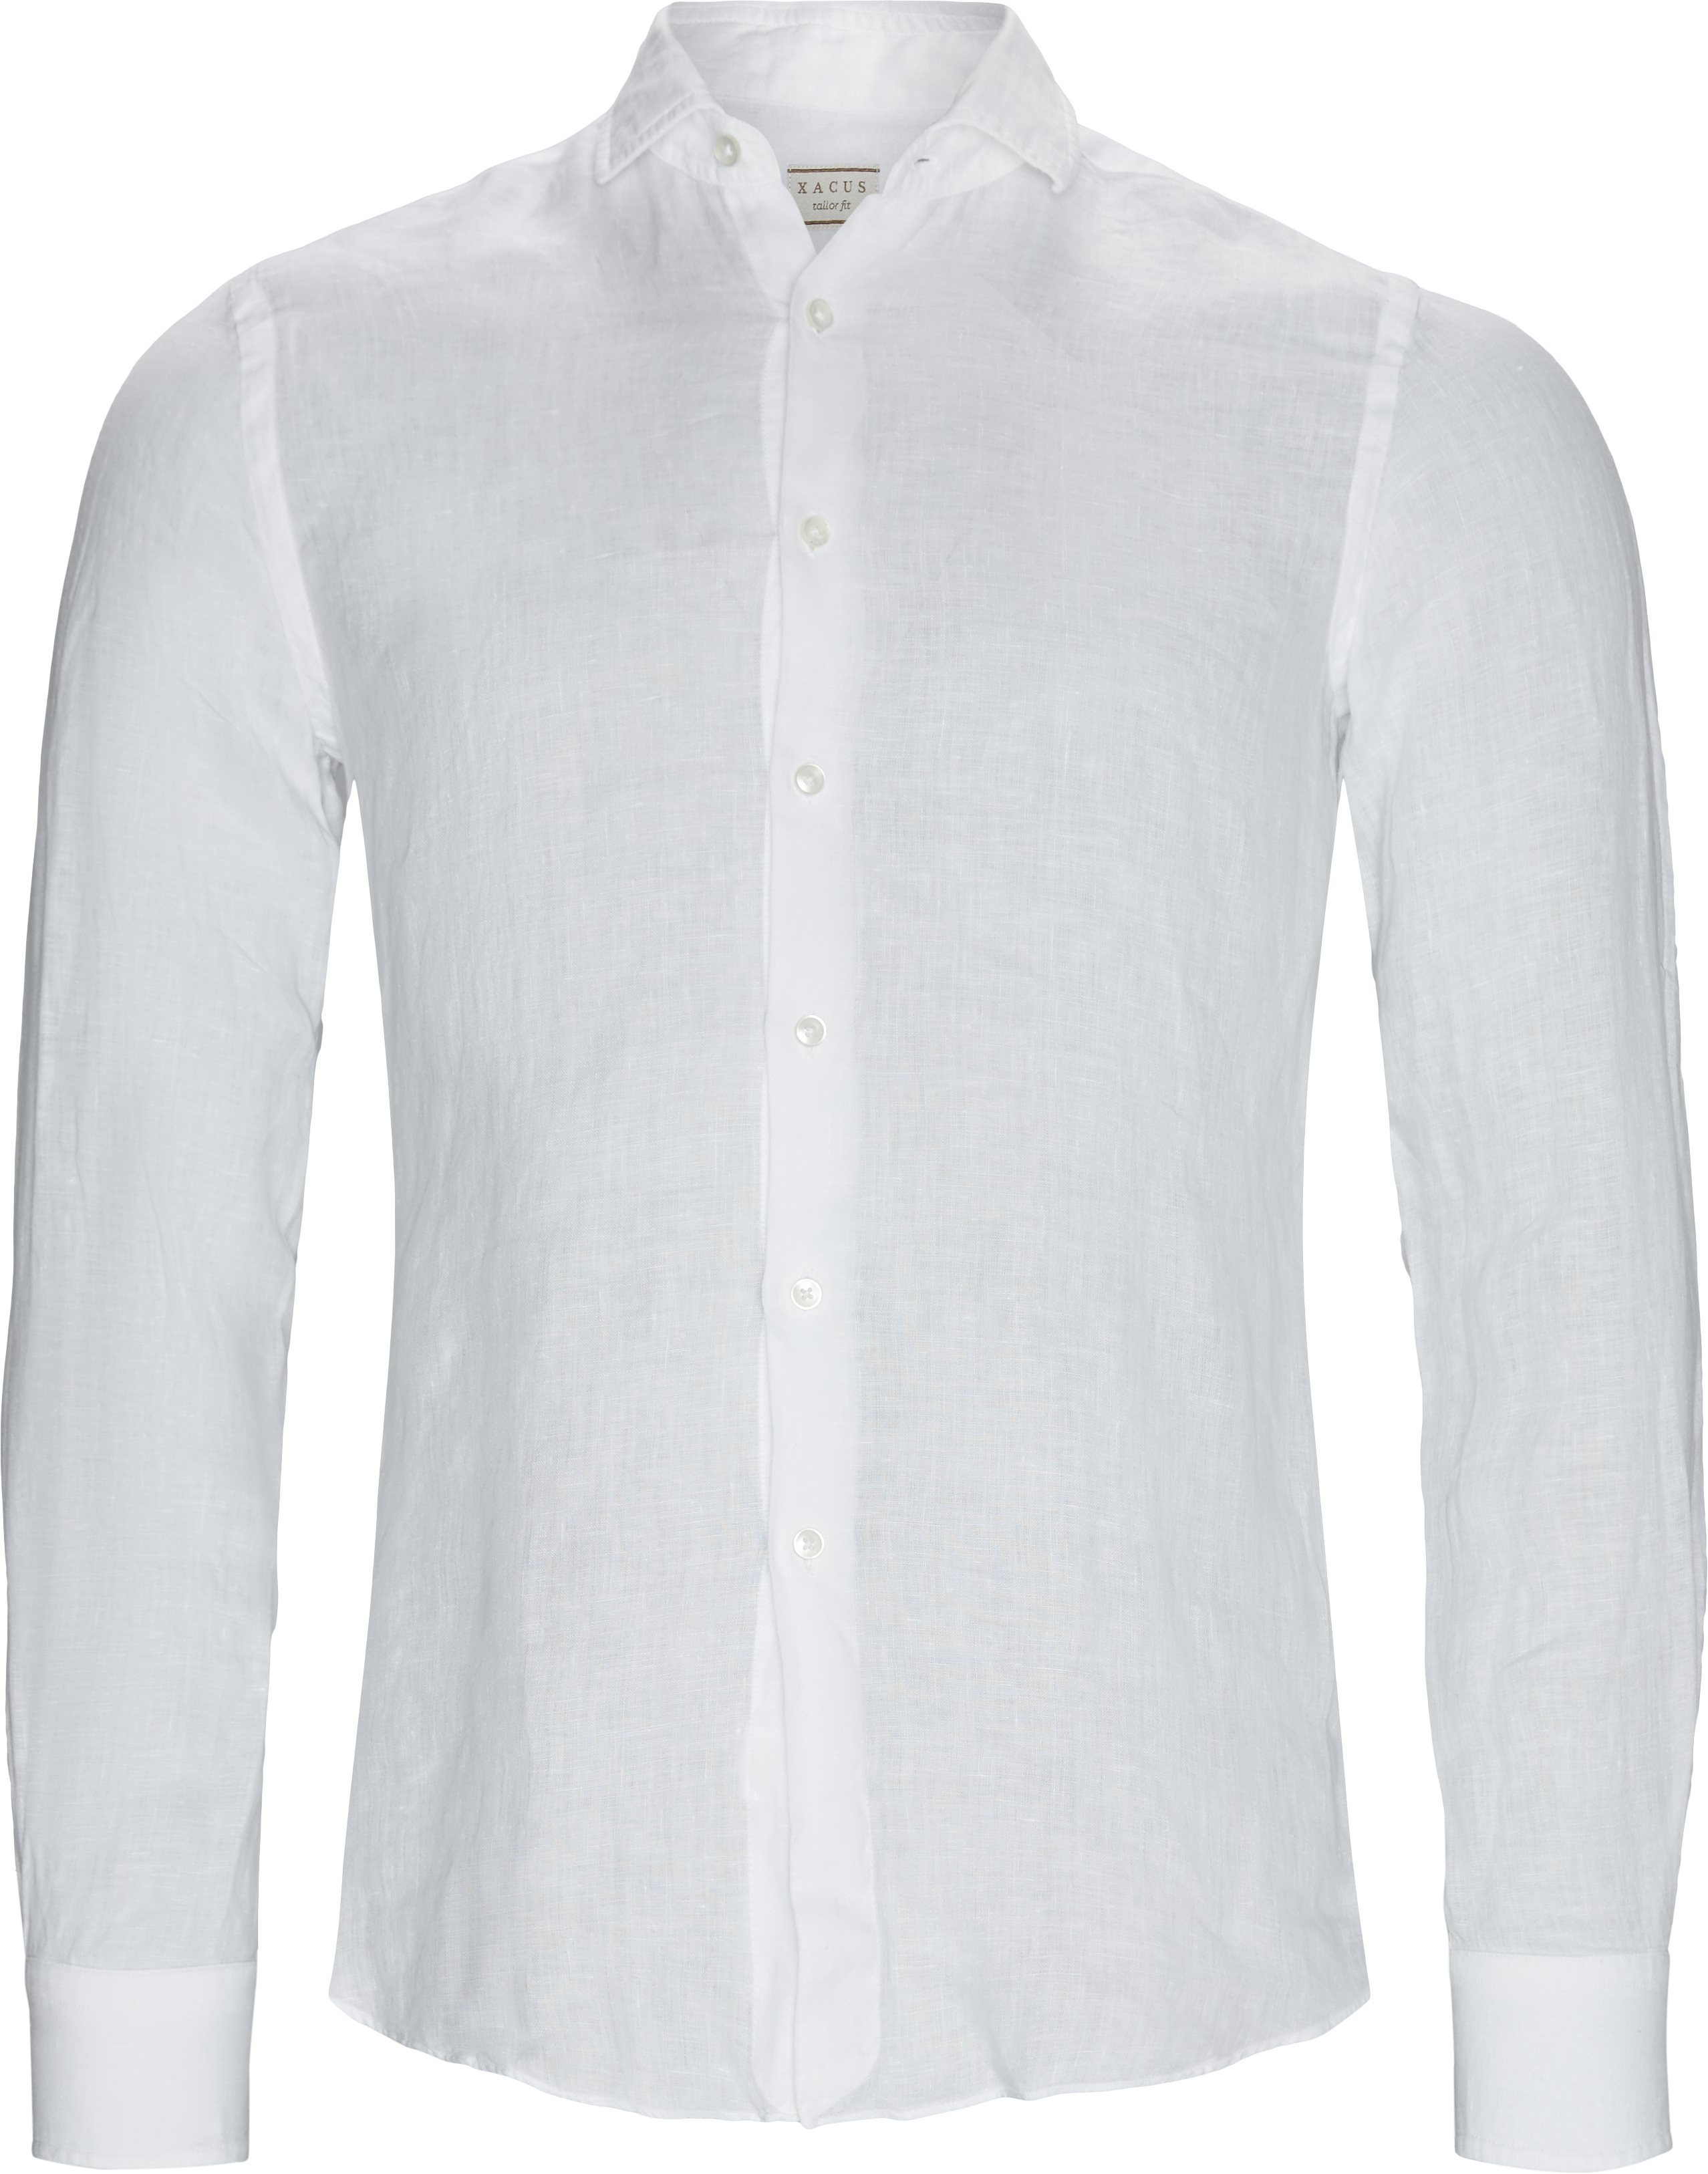 Shirts - Tailored fit - White